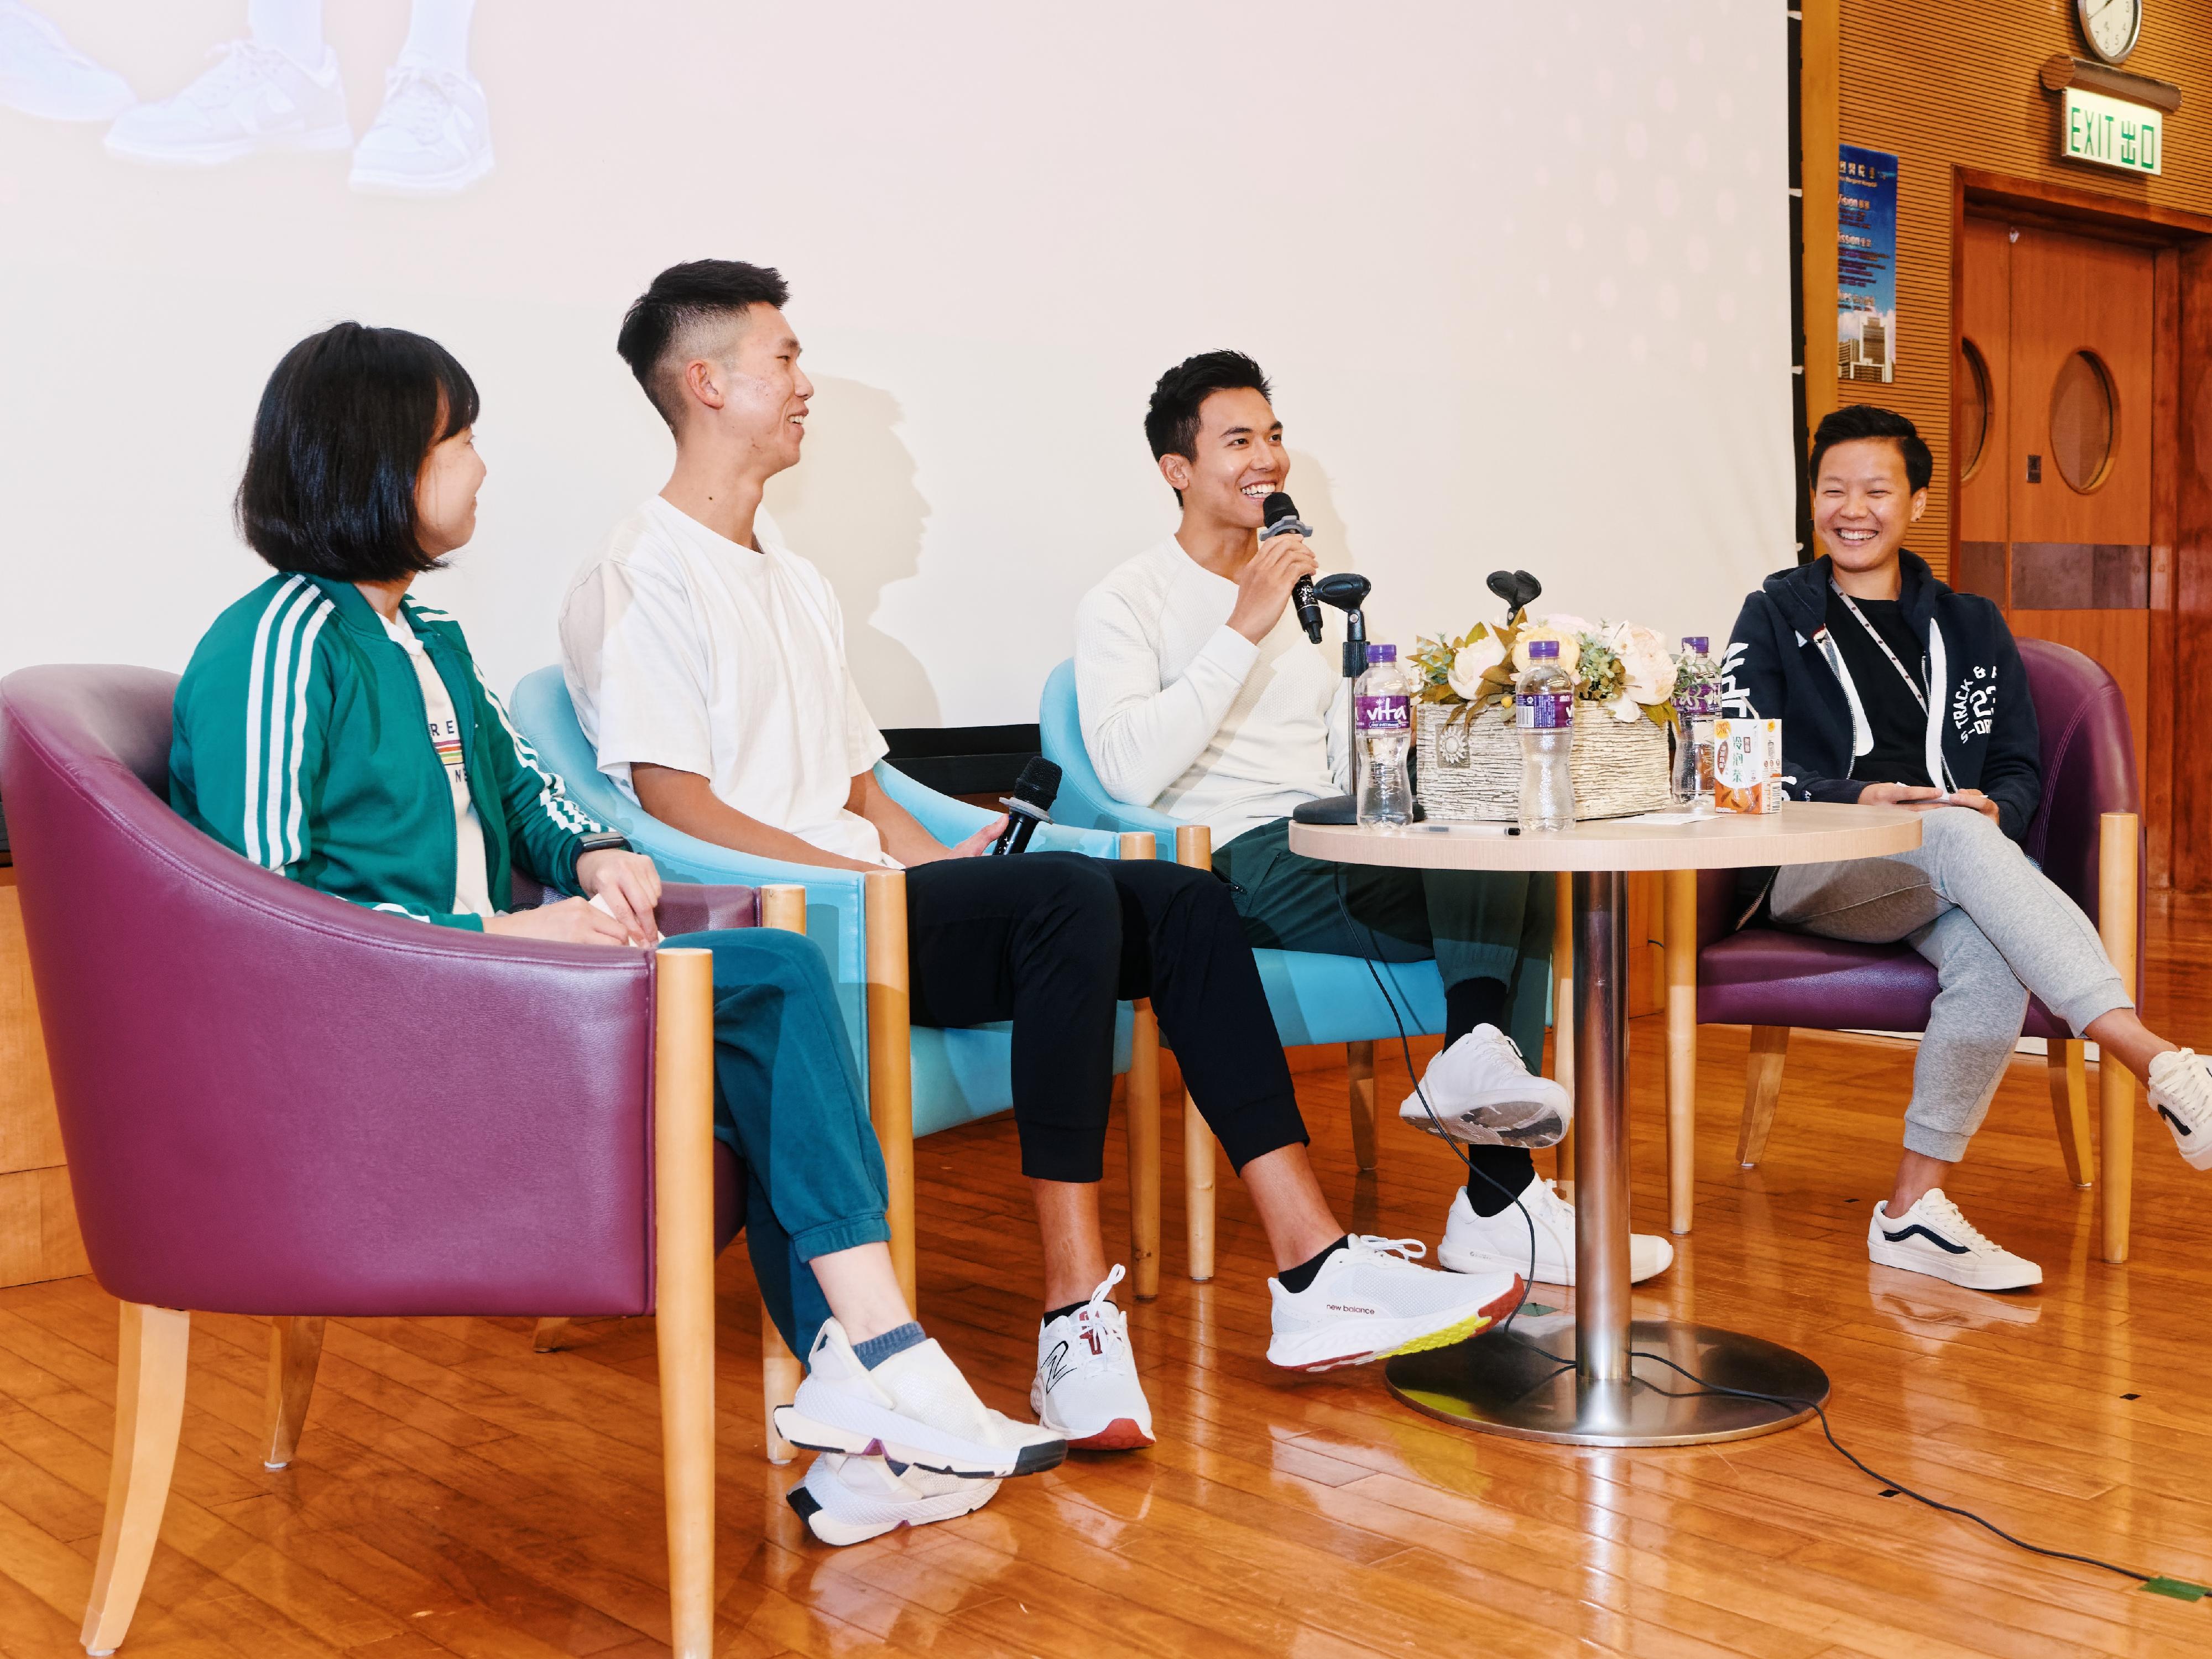 Lam San-tung (second right) and Wong Wai-chun (second left), who won the gold medal in Rowing Men's Coxless Pairs in the 19th Asian Games Hangzhou, attended a sharing session held at Princess Margaret Hospital on November 13, where they met hundreds of Hospital Authority staff to share their journey of winning the gold medal in the Asian Games.